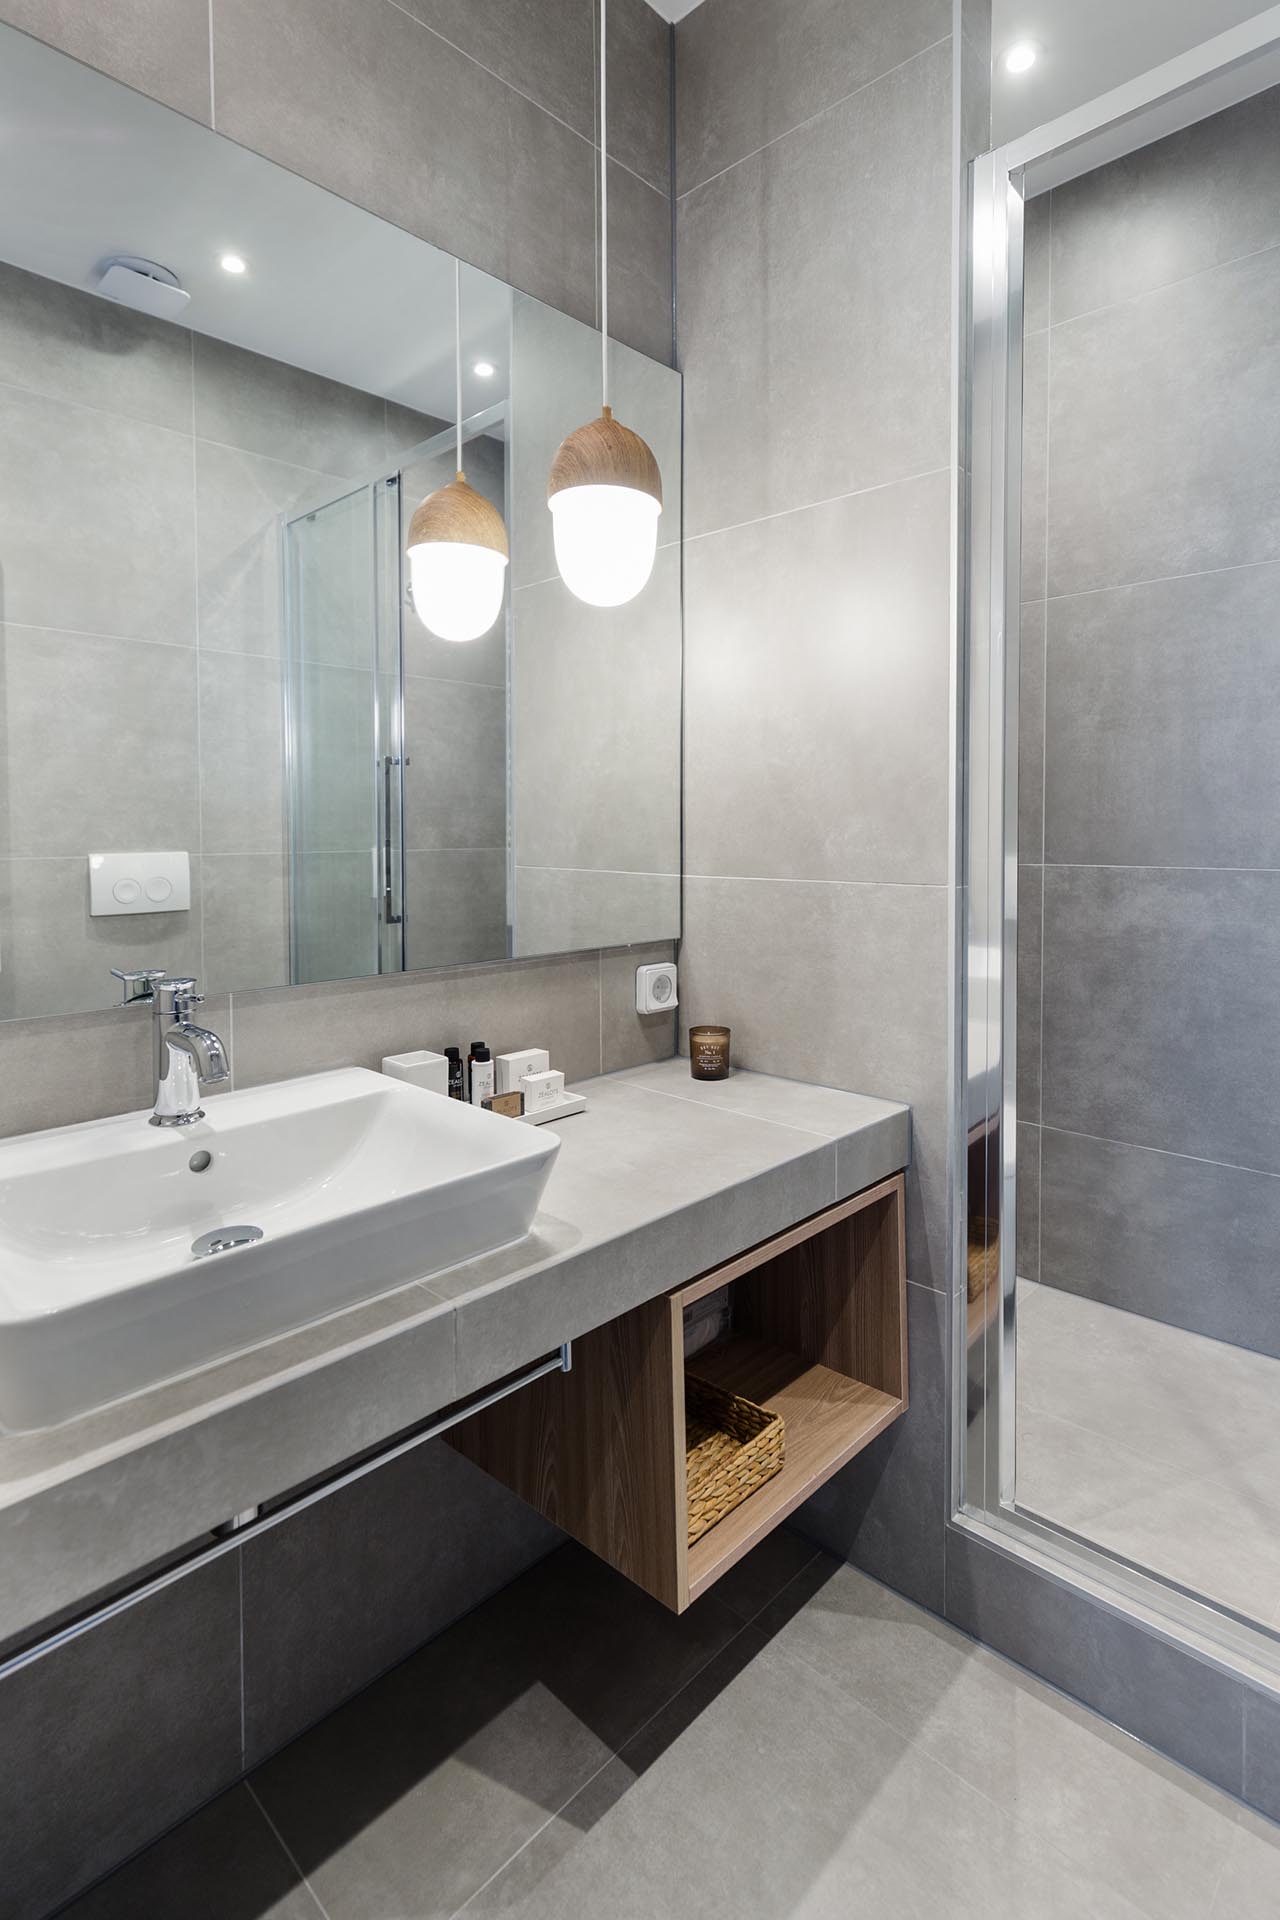 A small and modern bathroom with large format gray tiles.